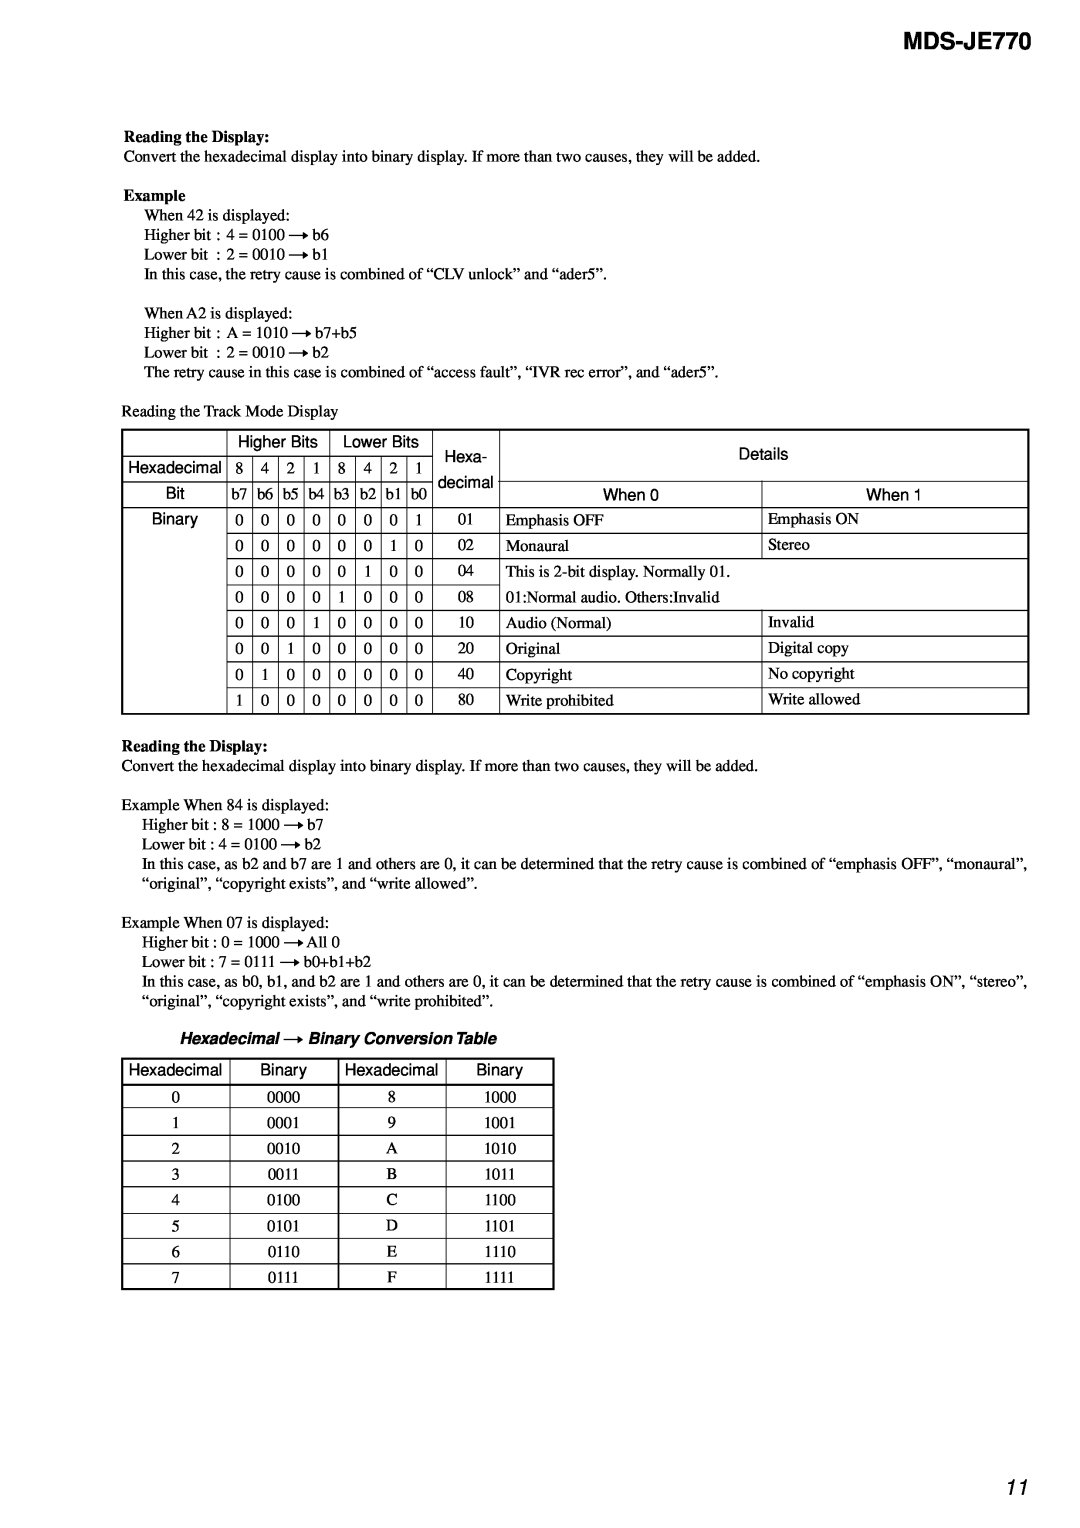 Sony MDS-JE770 specifications Reading the Display, Hexadecimal t Binary Conversion Table 